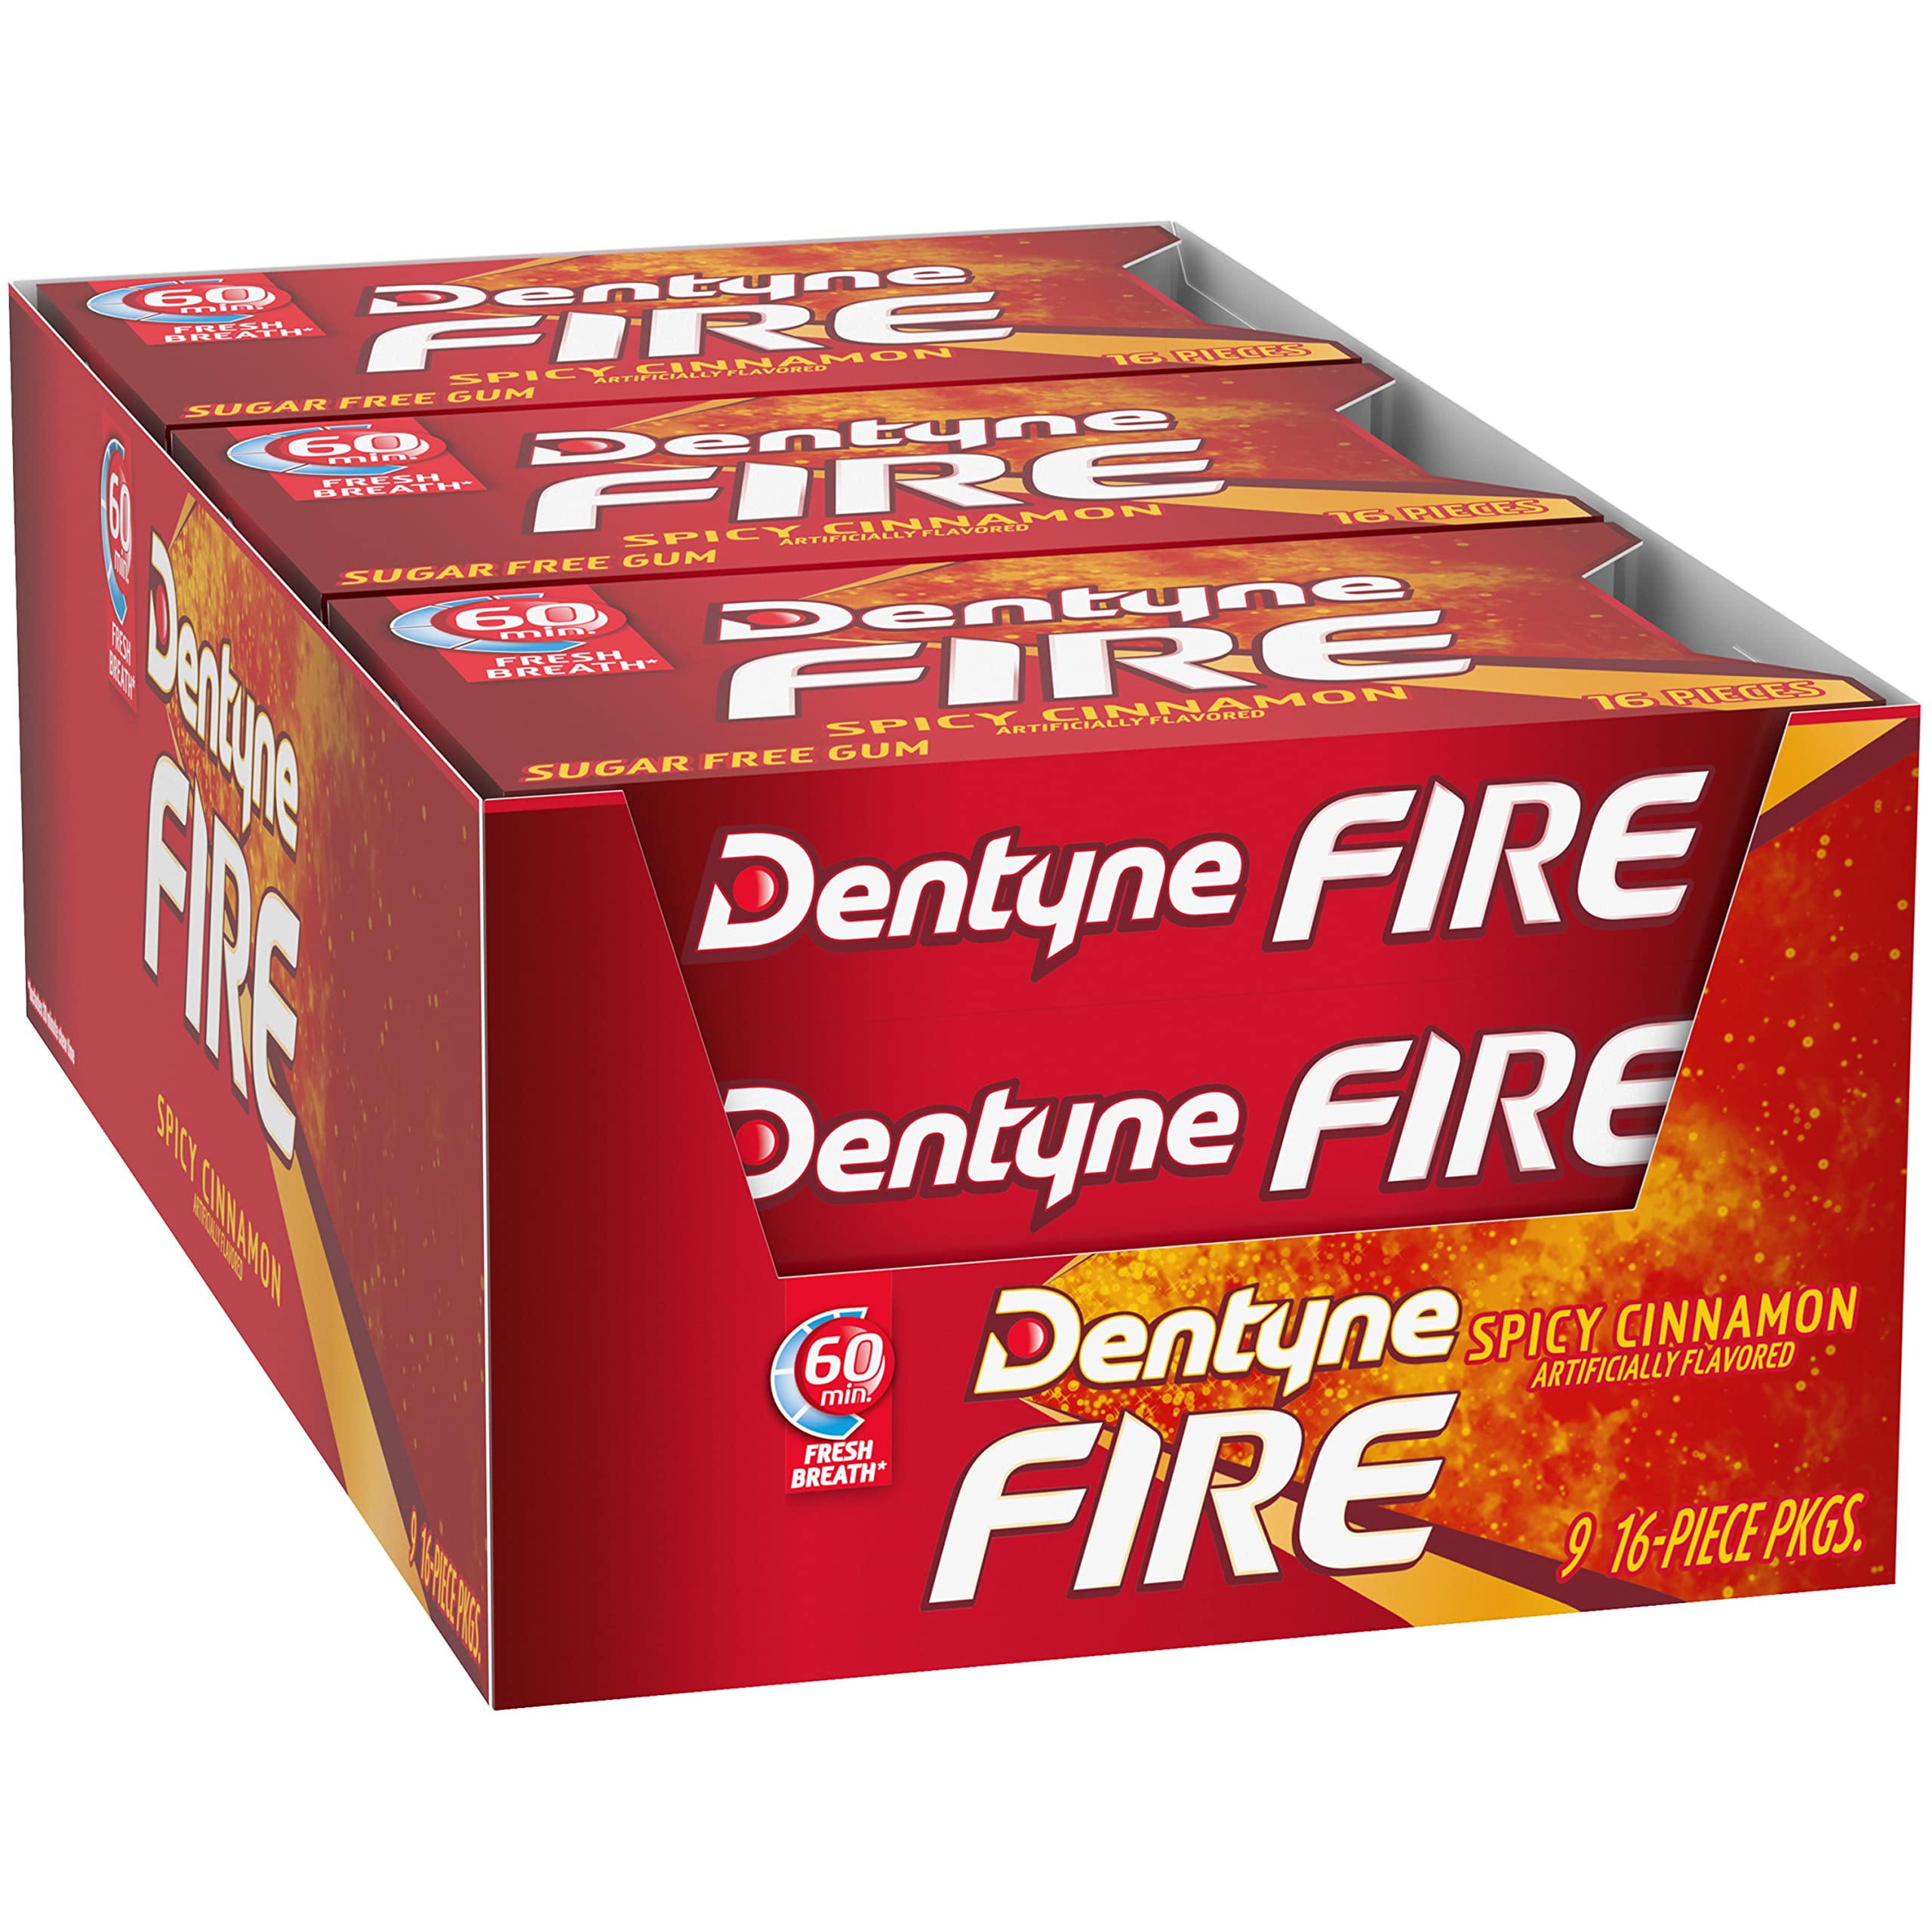 9-Pack Dentyne Fire Spicy Cinnamon Sugar Free Gum $6.54 w/ S&S + Free Shipping w/ Prime or on $35+